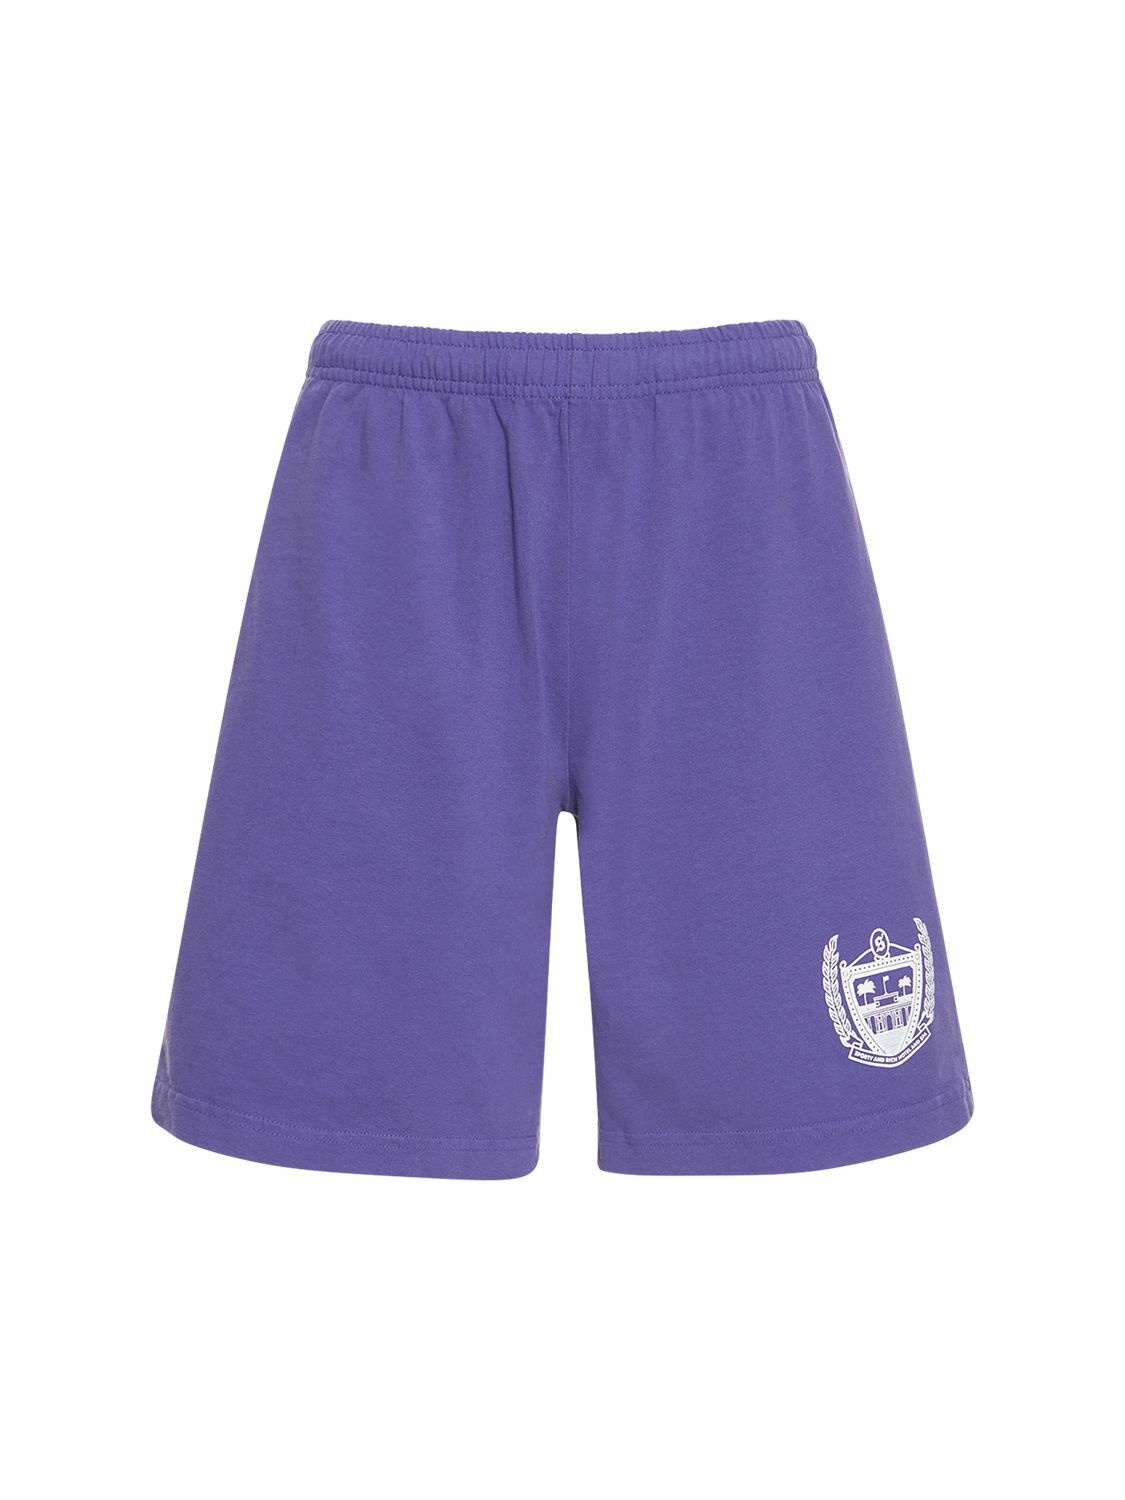 Photo: SPORTY & RICH Beverly Hills Cotton Gym Shorts